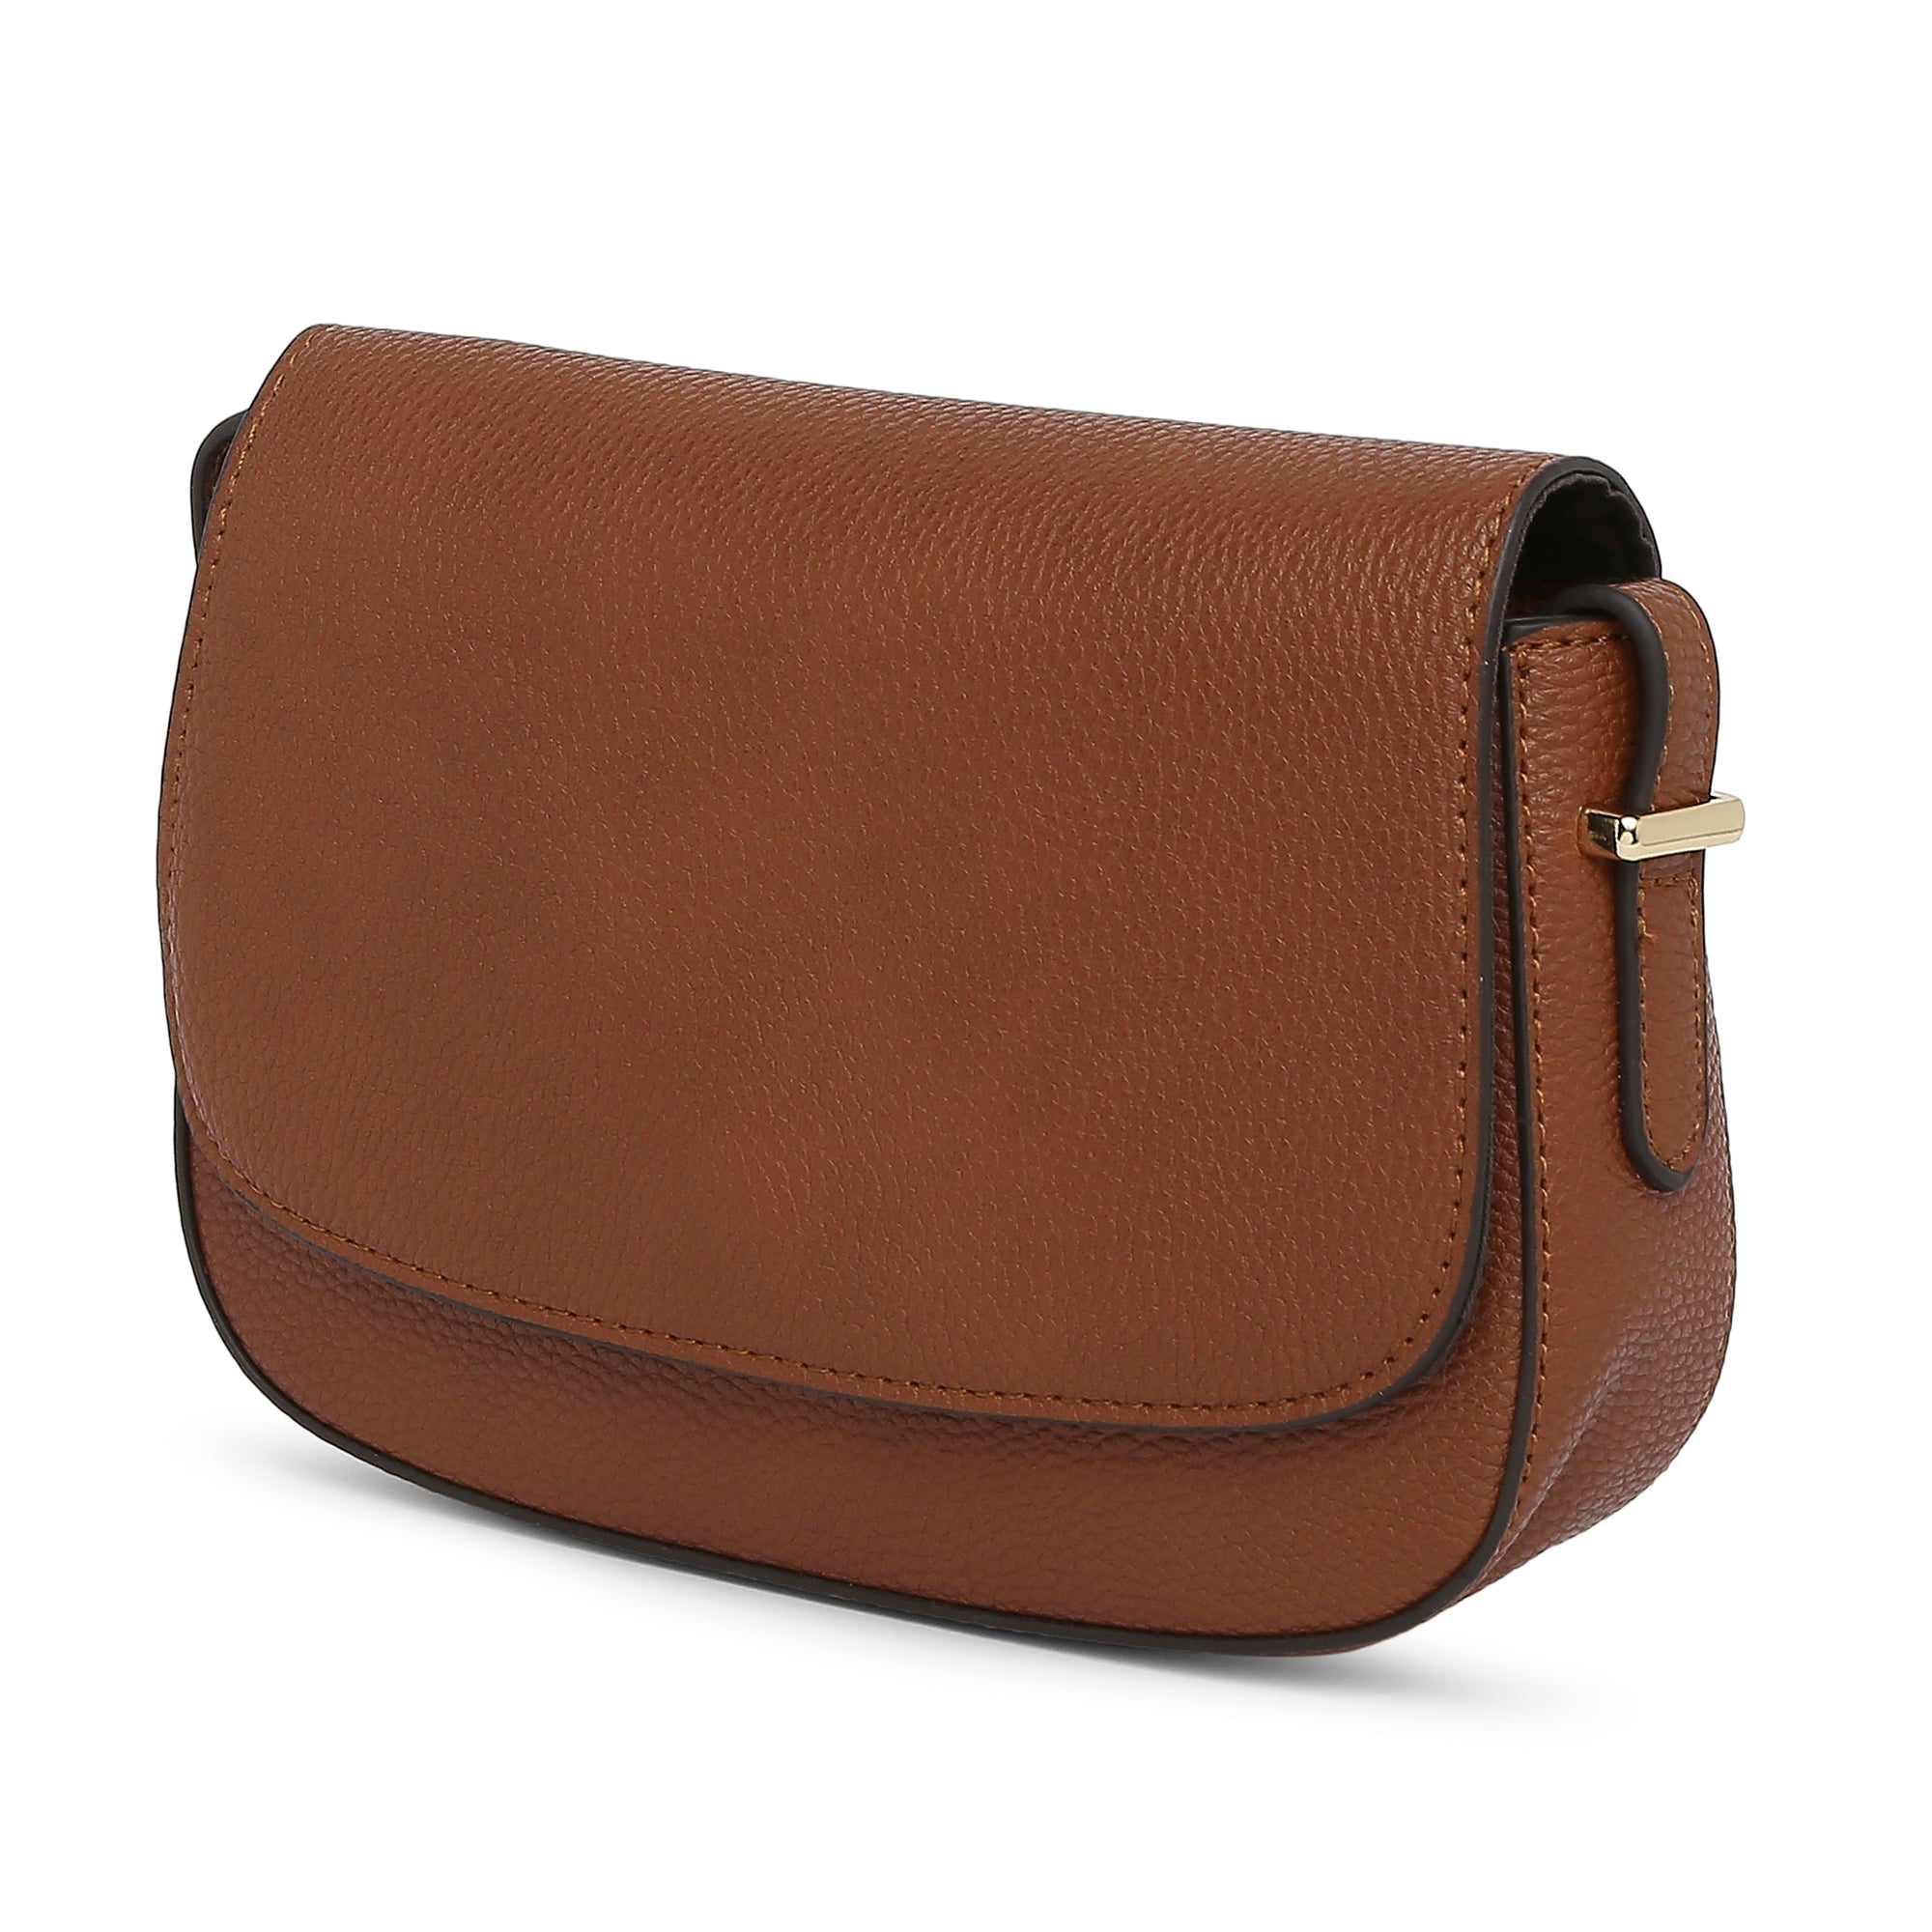 Palermo Leather Side Bag // Mud - Tassia Leather Goods - Touch of Modern